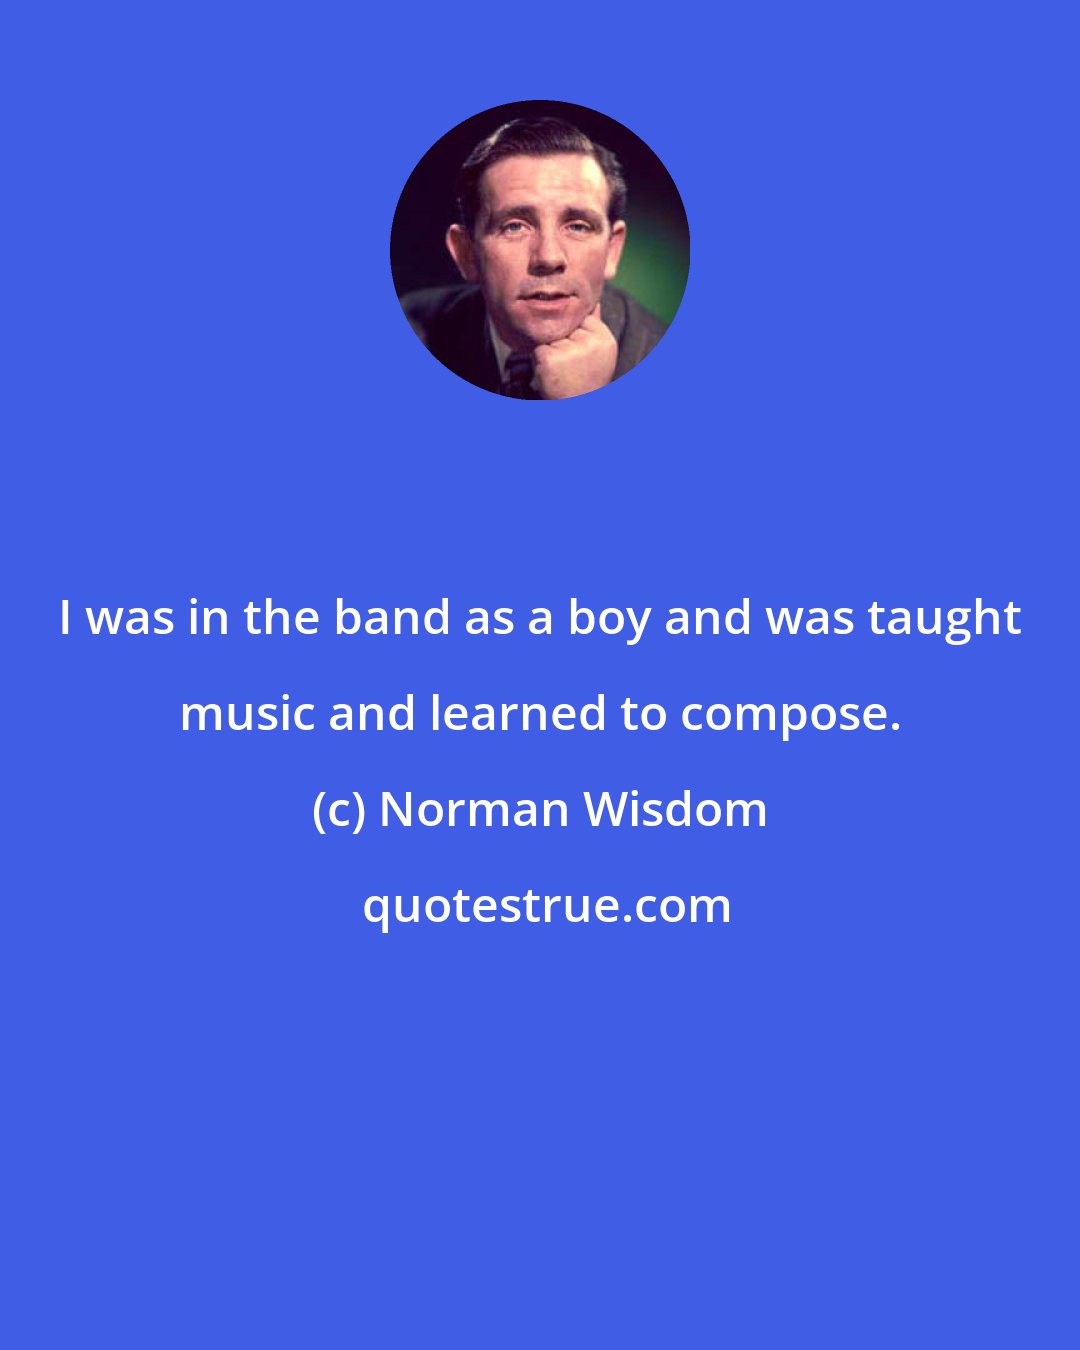 Norman Wisdom: I was in the band as a boy and was taught music and learned to compose.